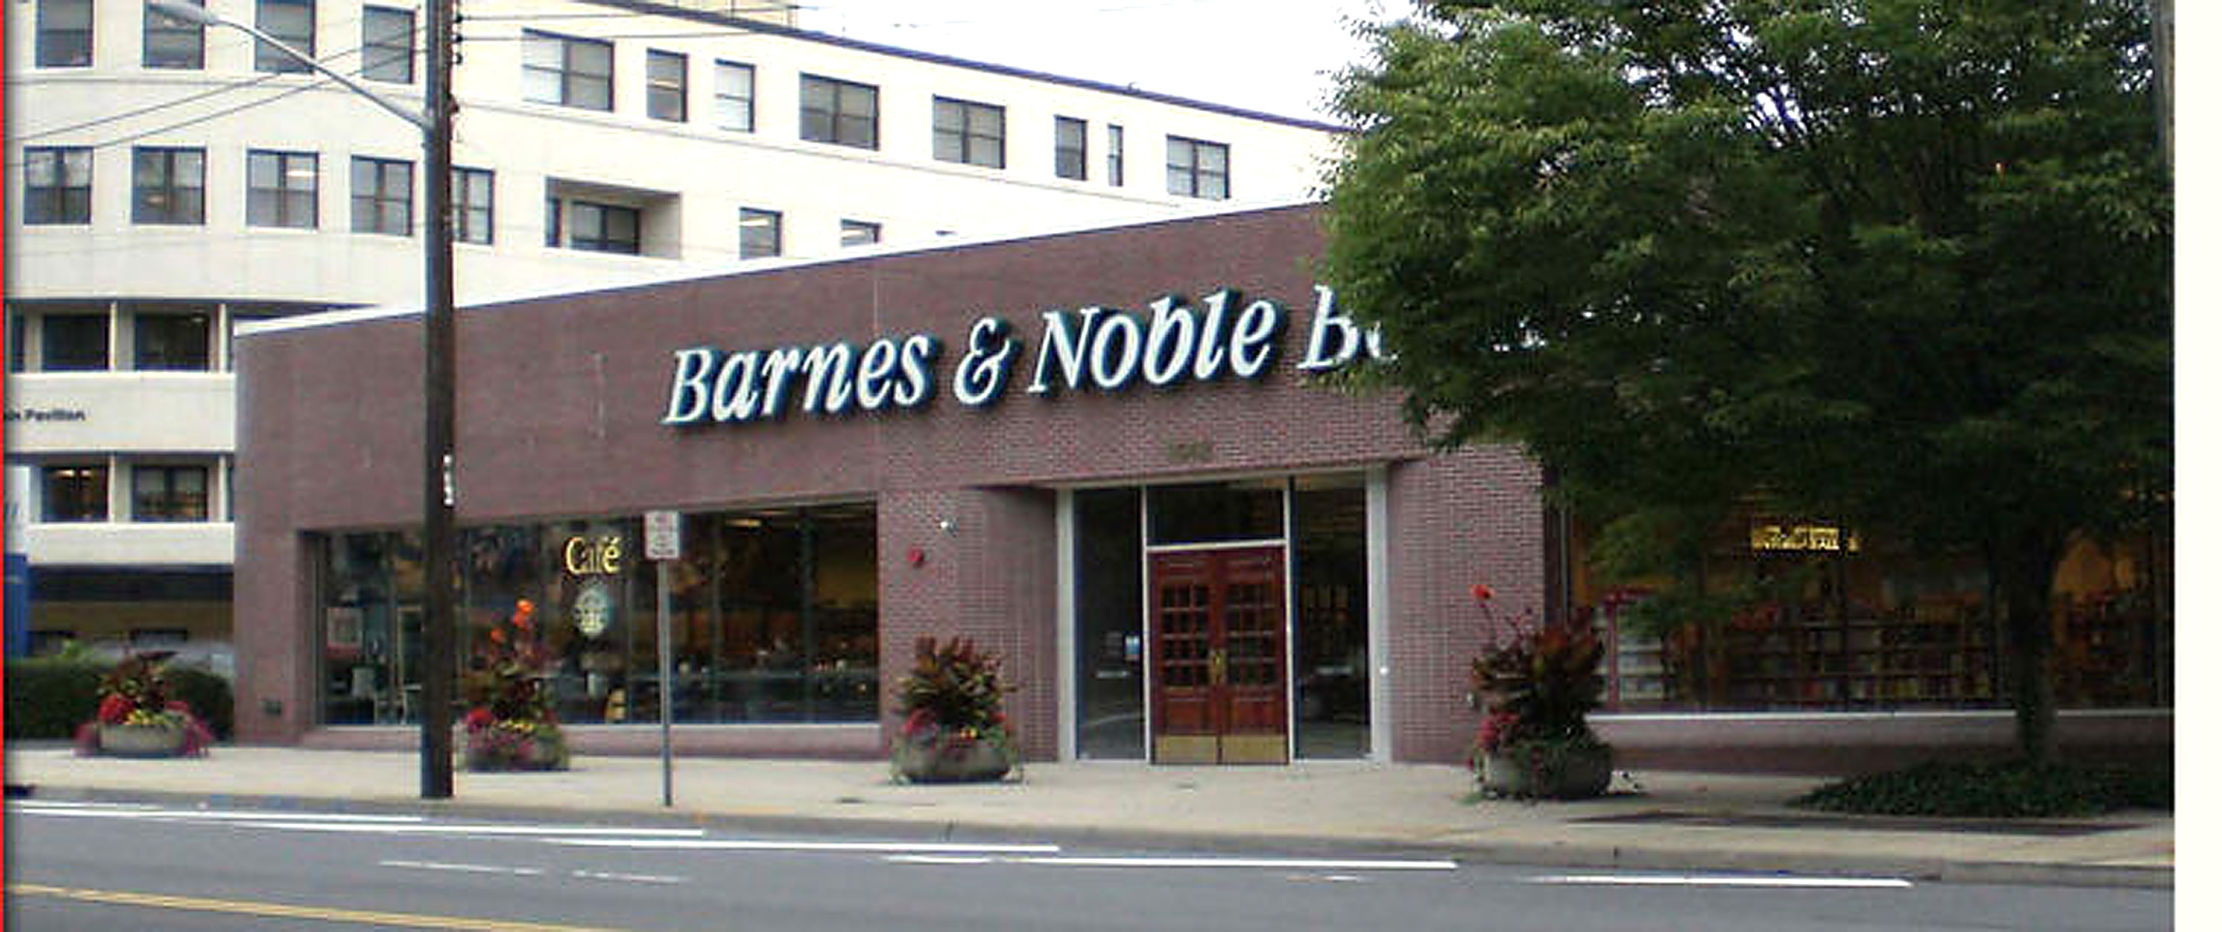 Owner of Barnes & Noble gains approval for development